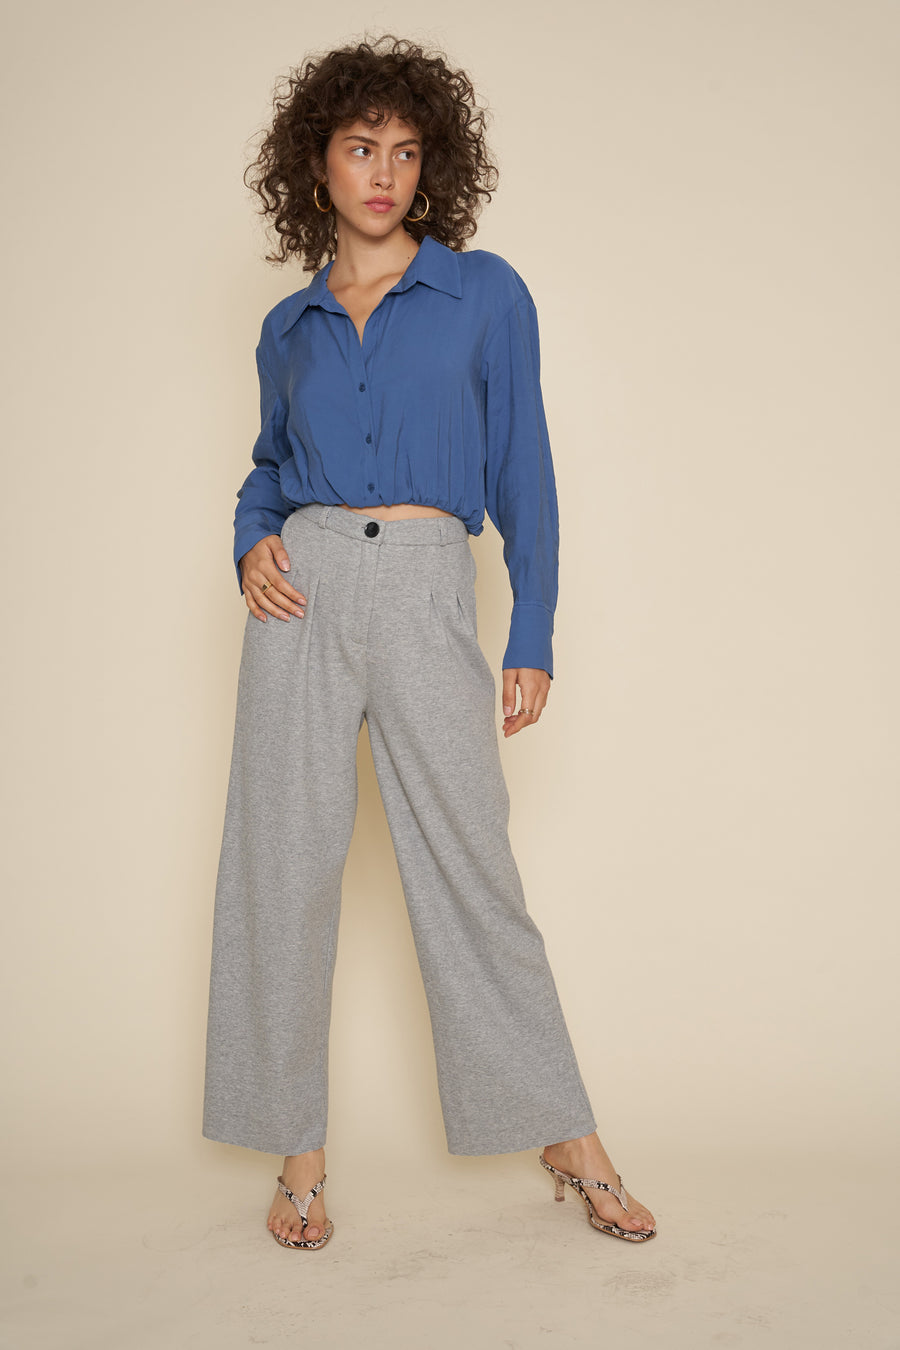 No Srcipt image - Images of 4 of 5 Heather Grey Wide Leg Sweat Pant